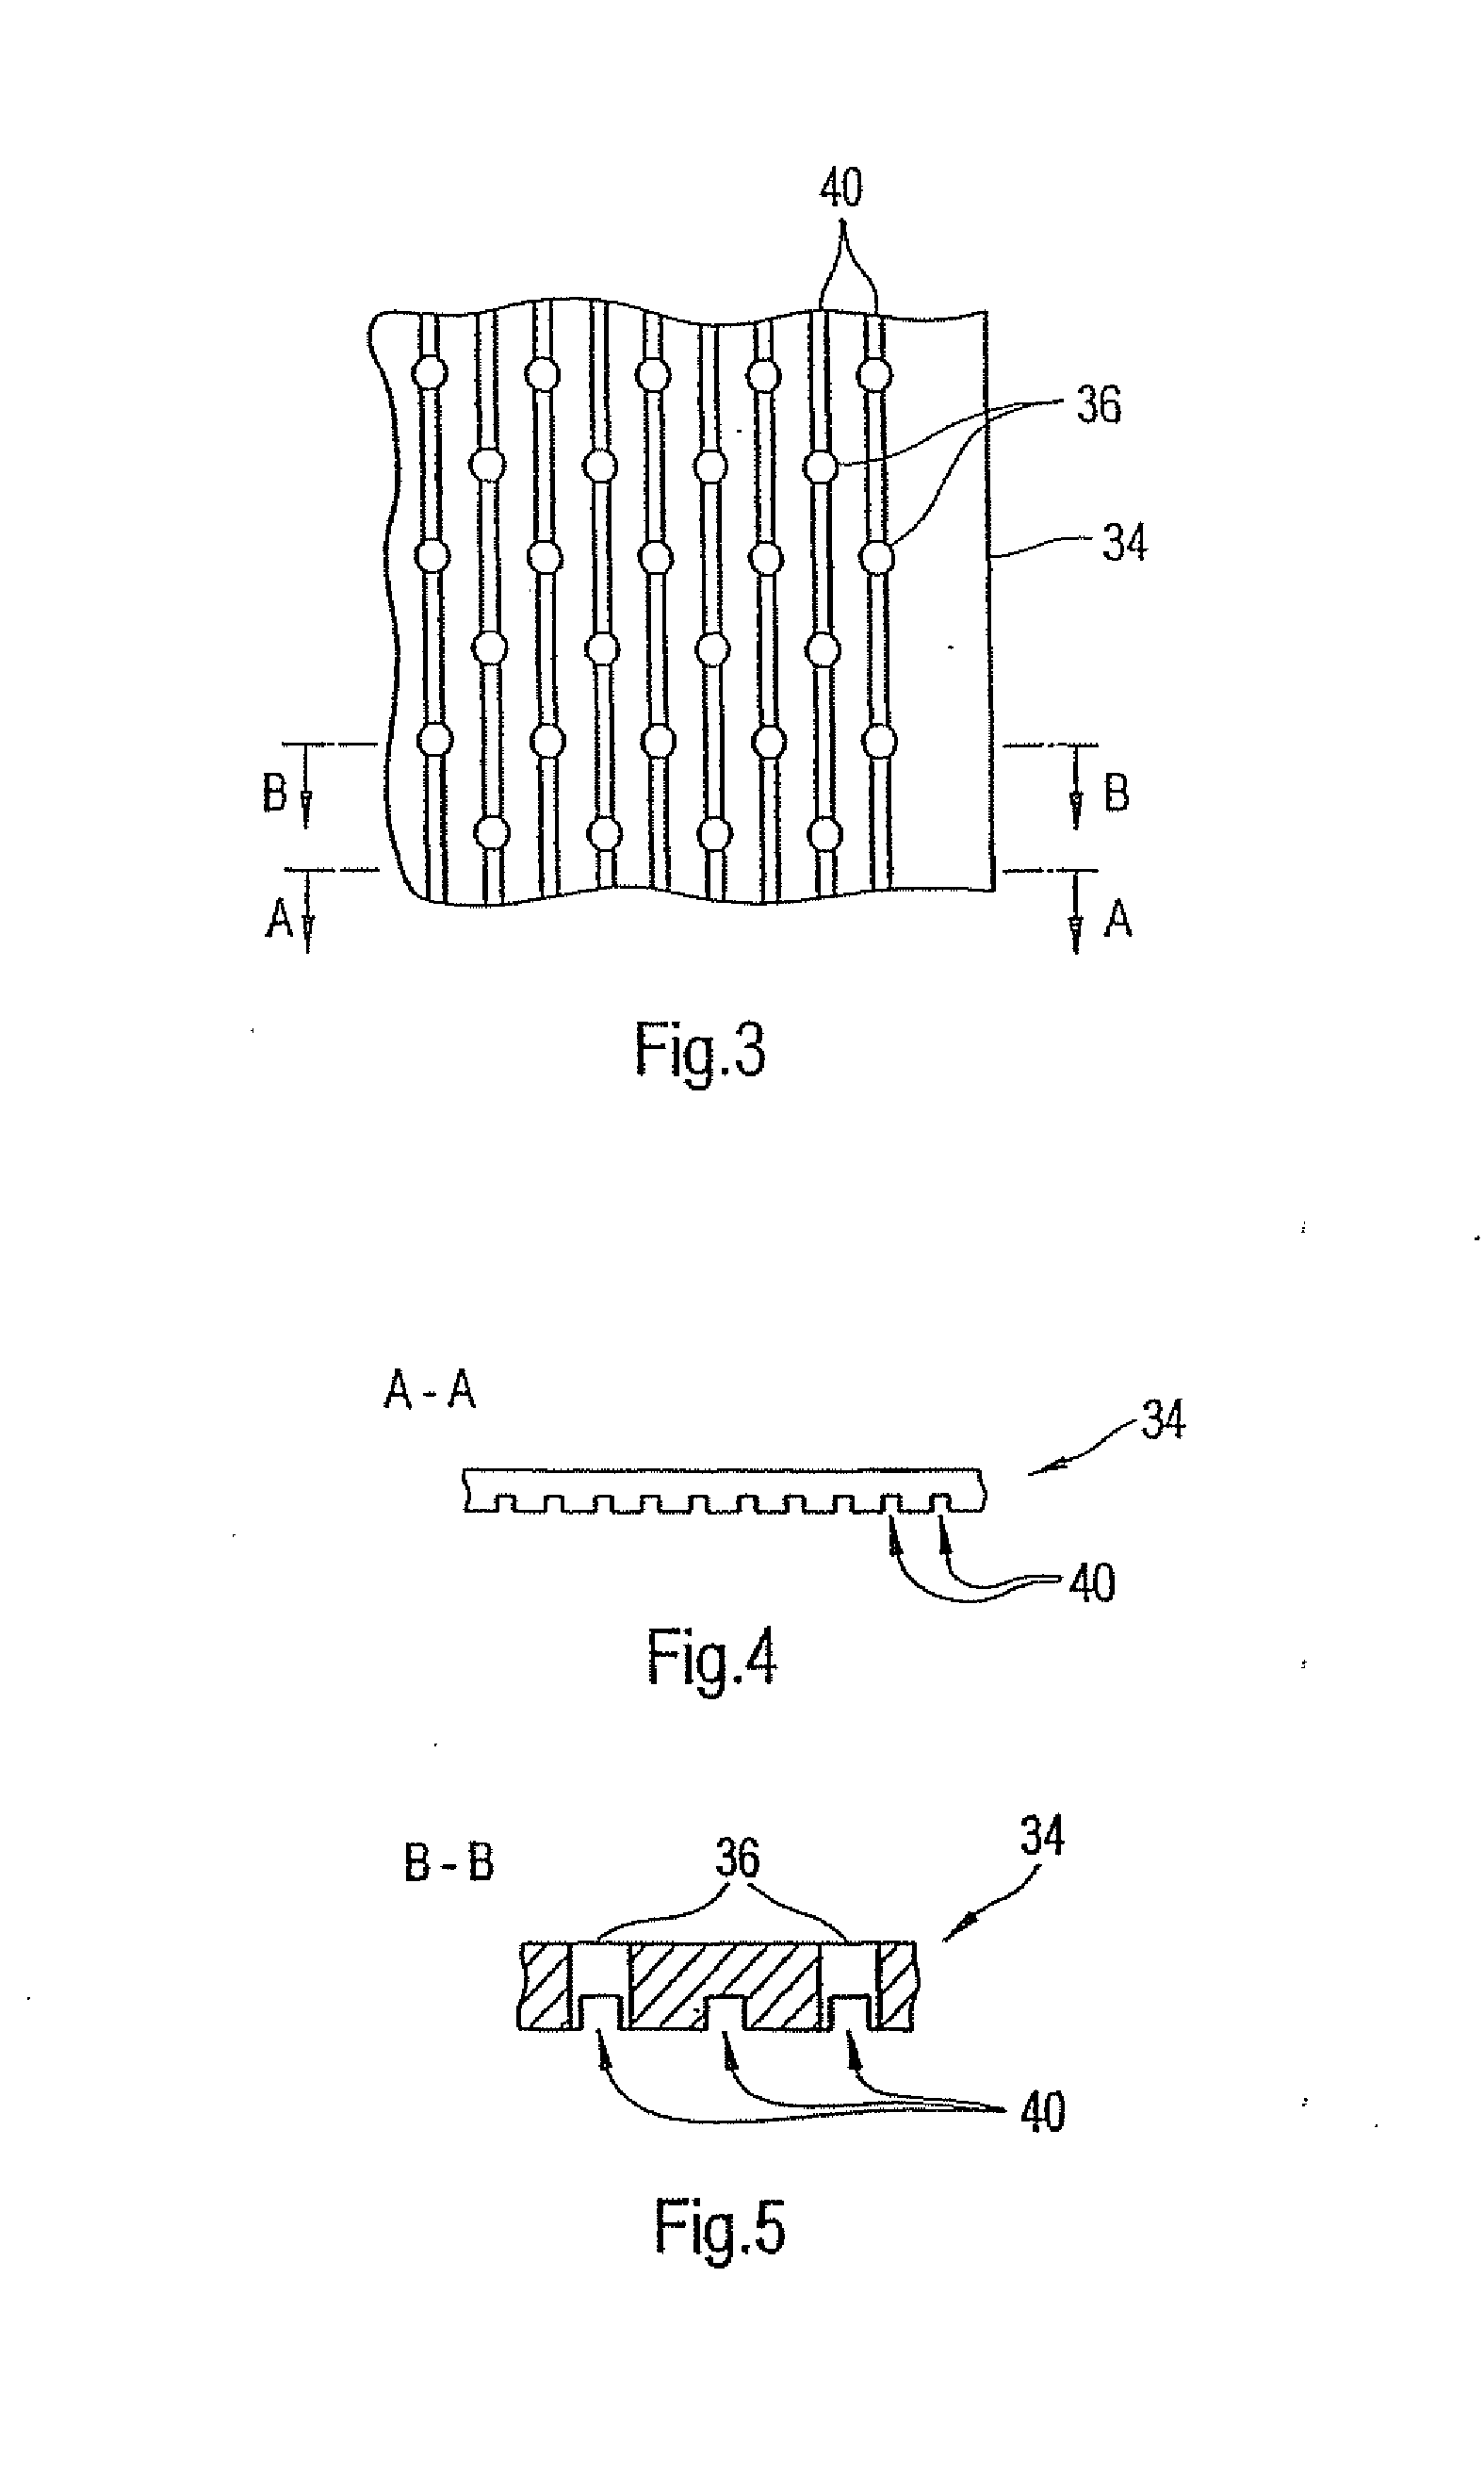 Forming fabric and/or tissue molding belt and/or molding belt for use on an atmos system